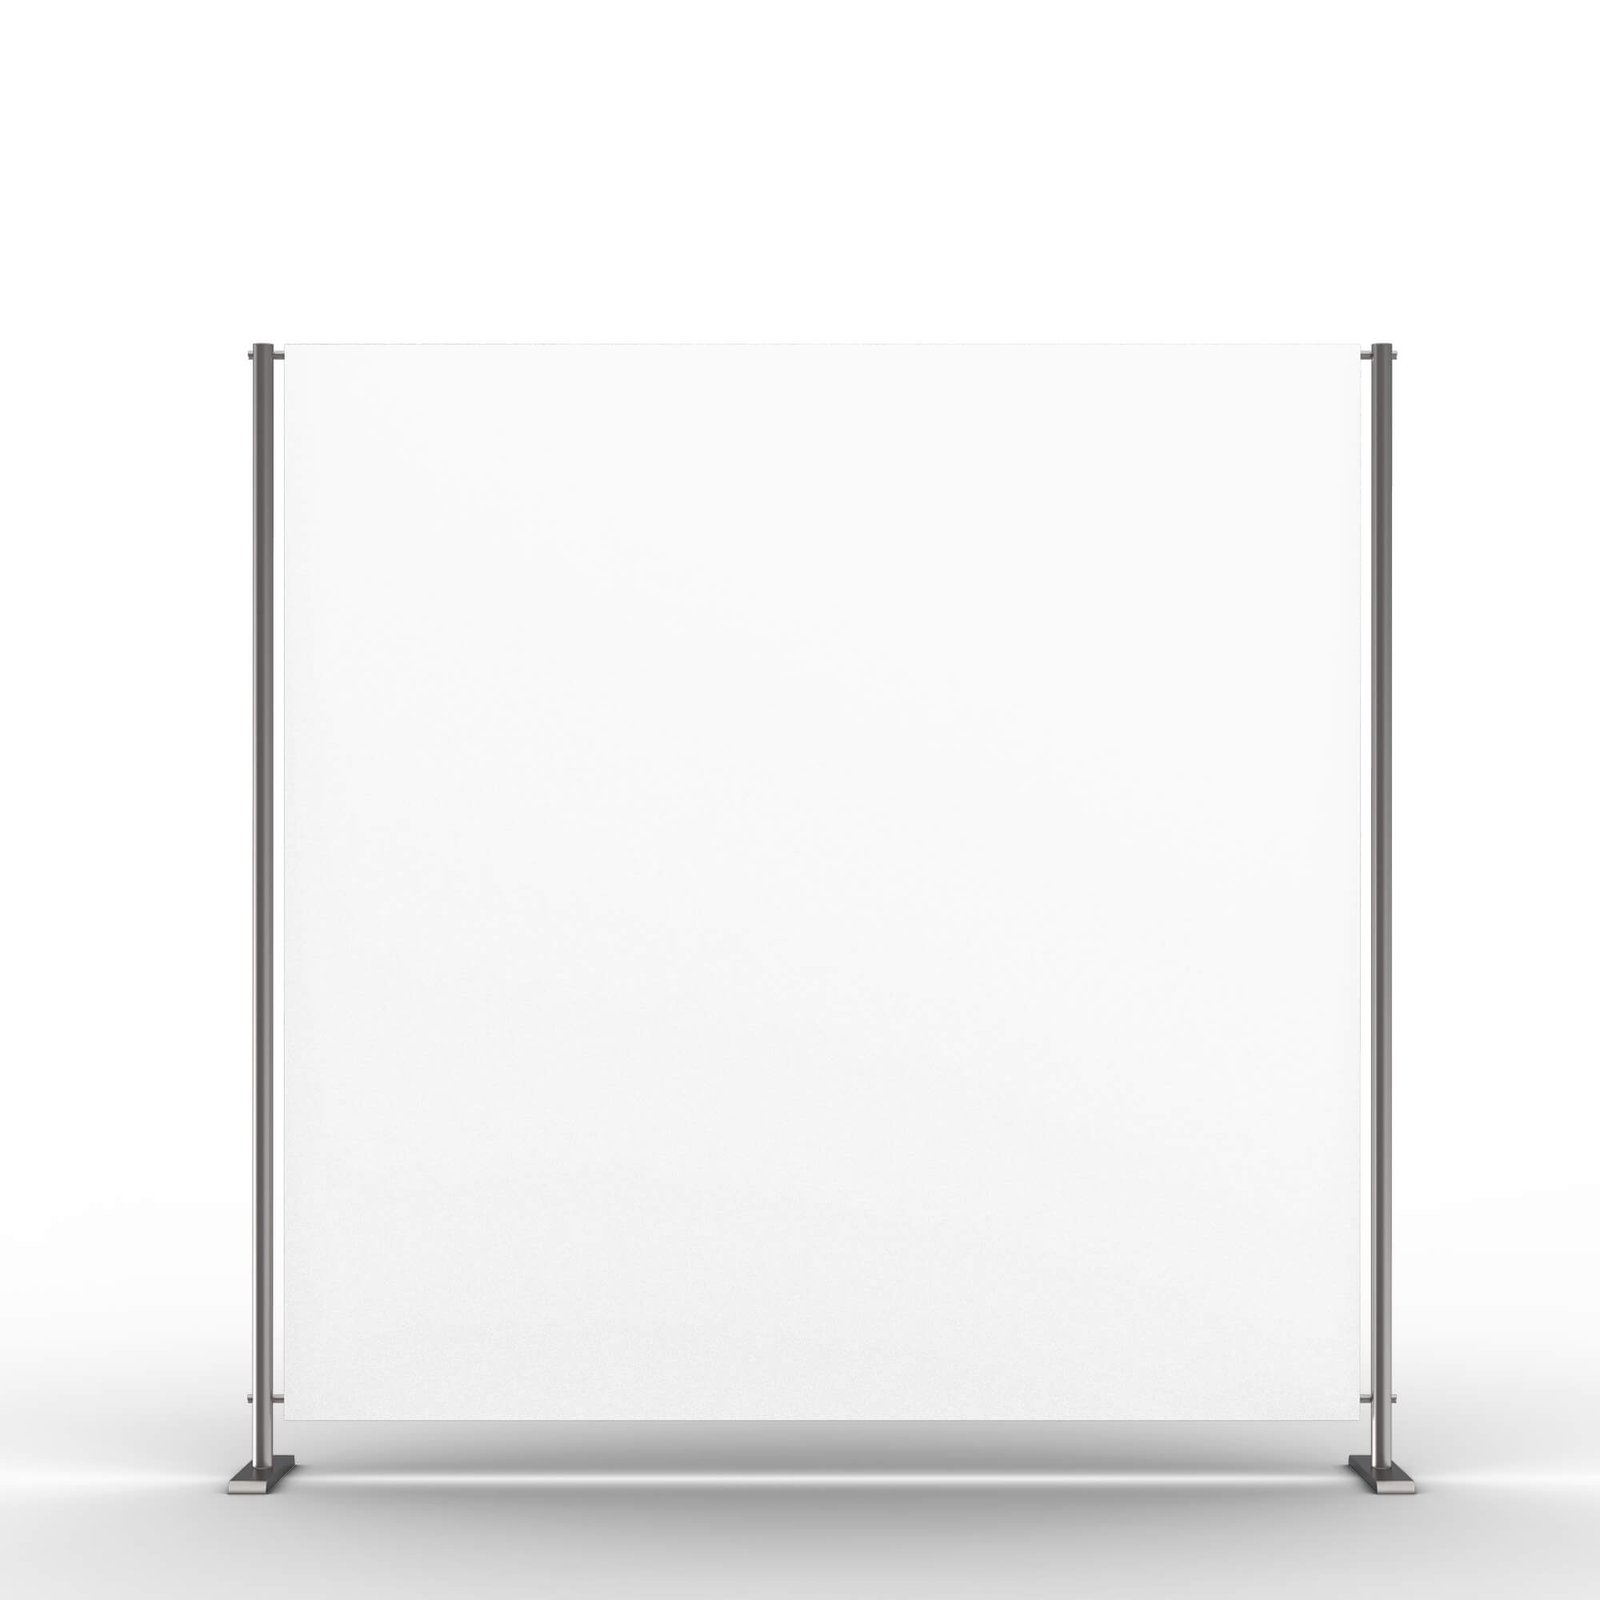 Blank Free Event Backdrop Mockup PSD Template